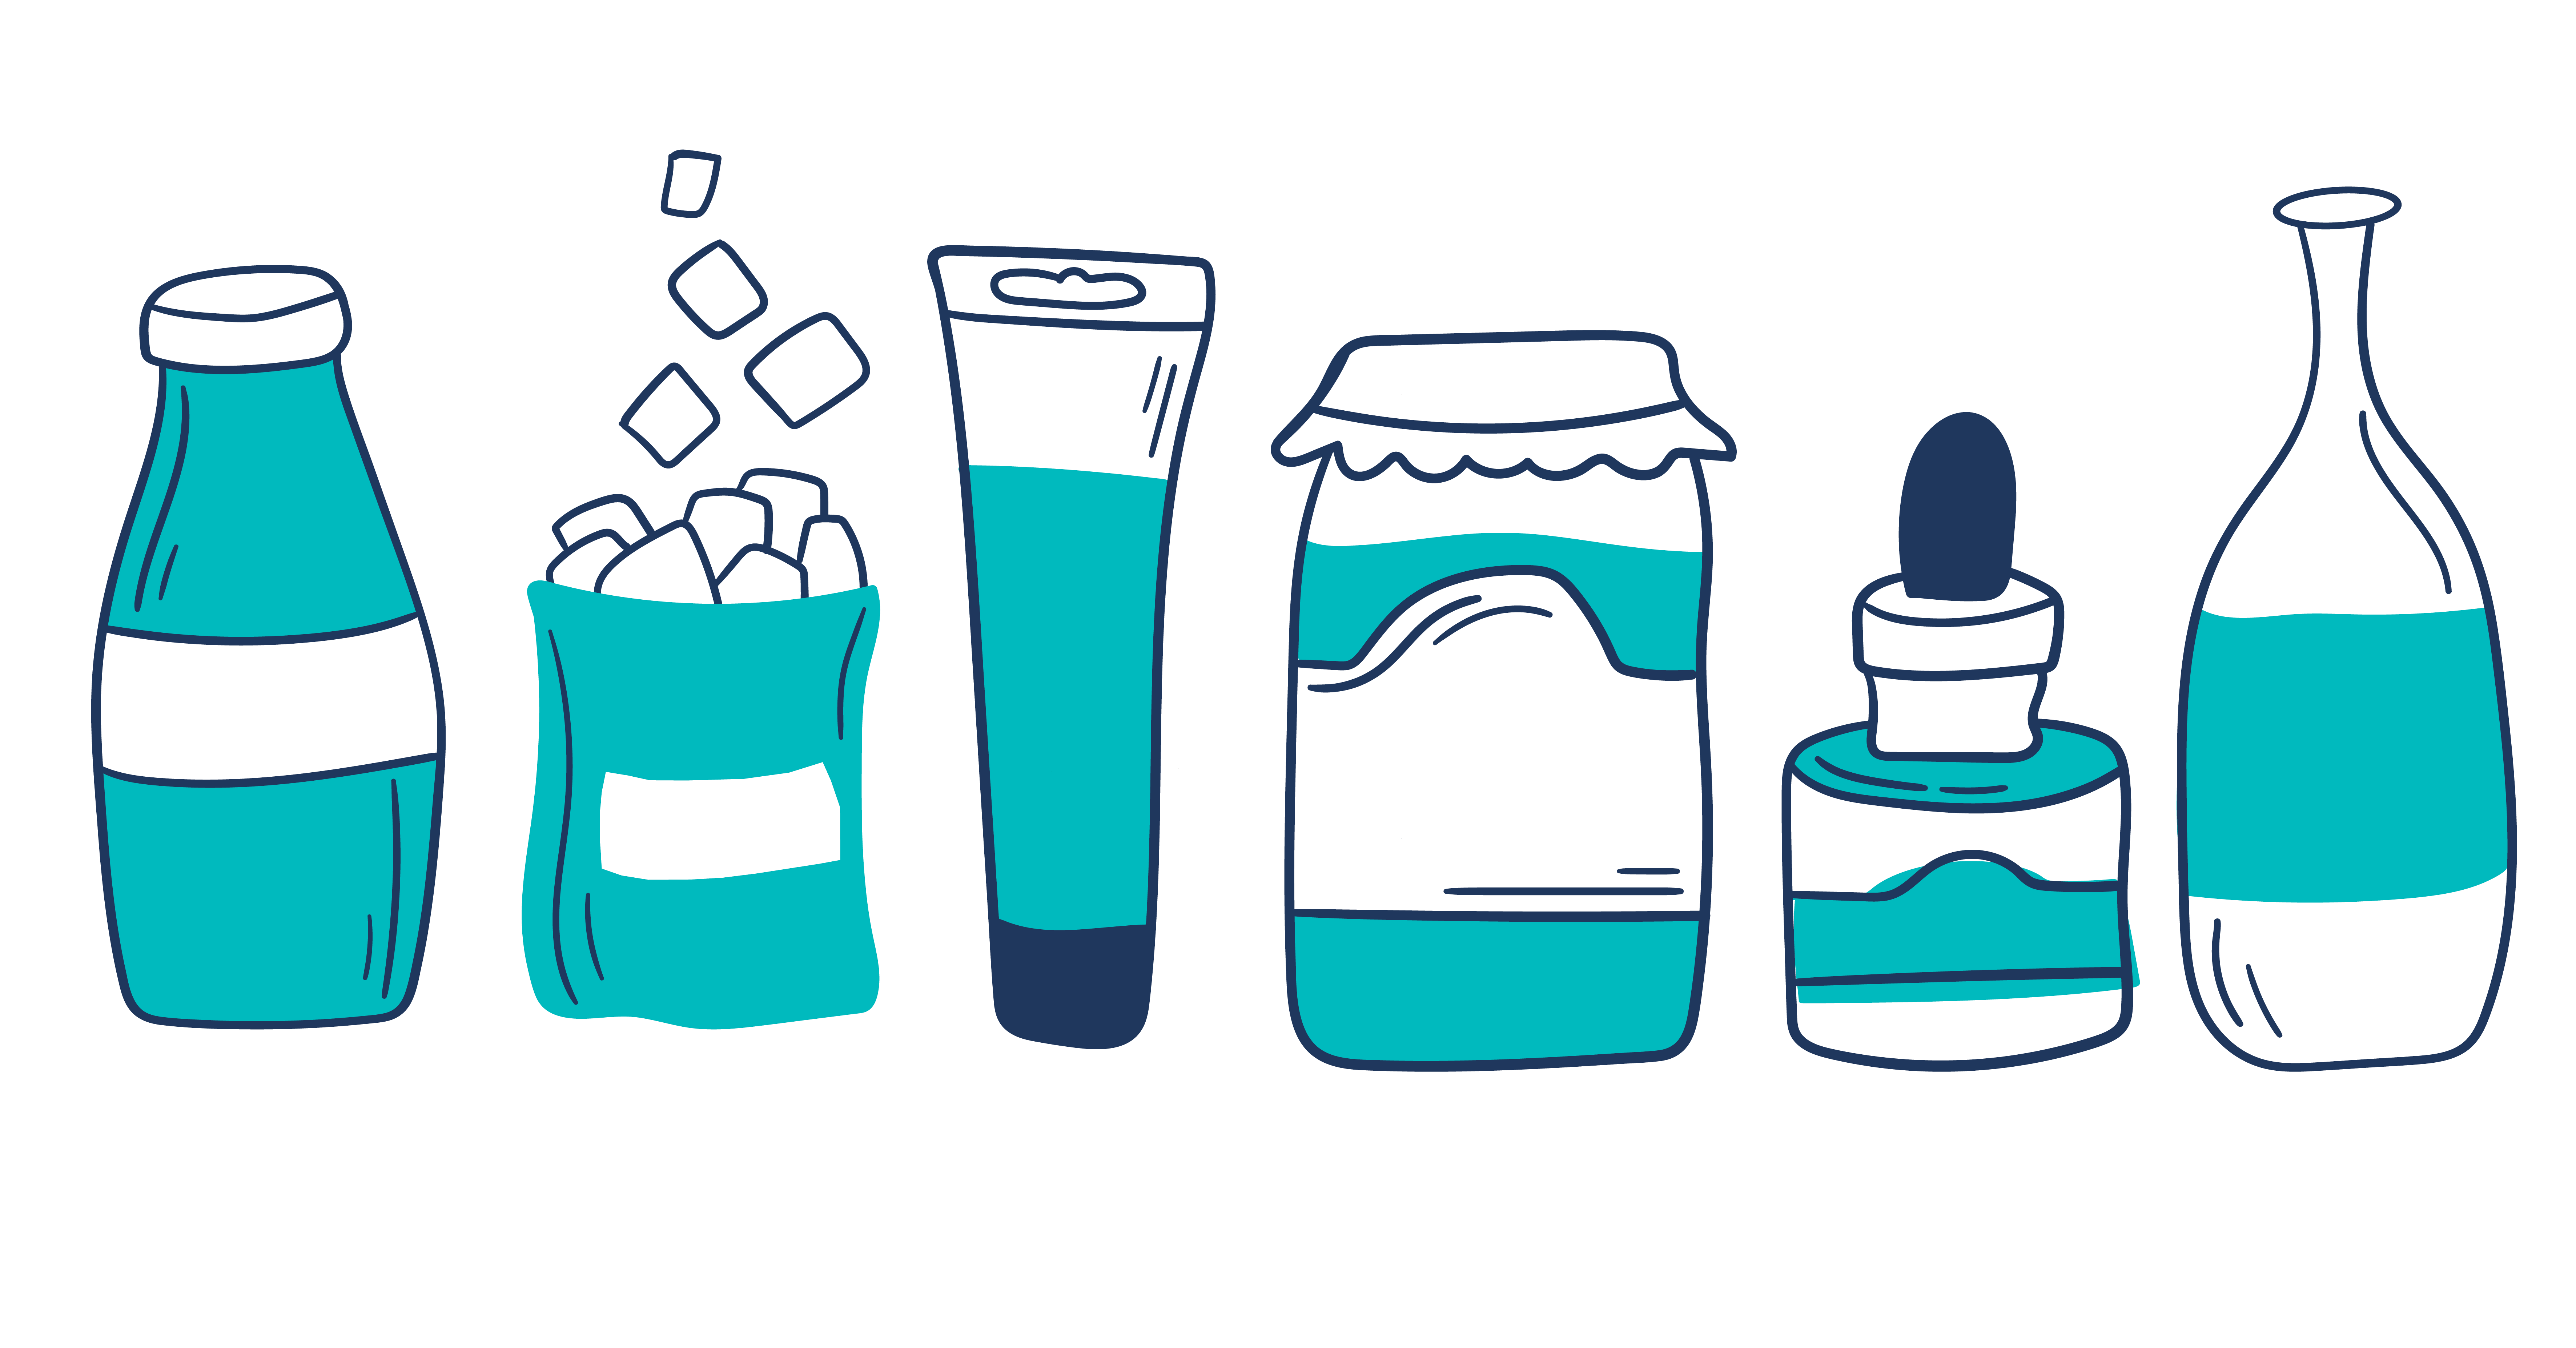 Illustration of packaging for food and cosmetics